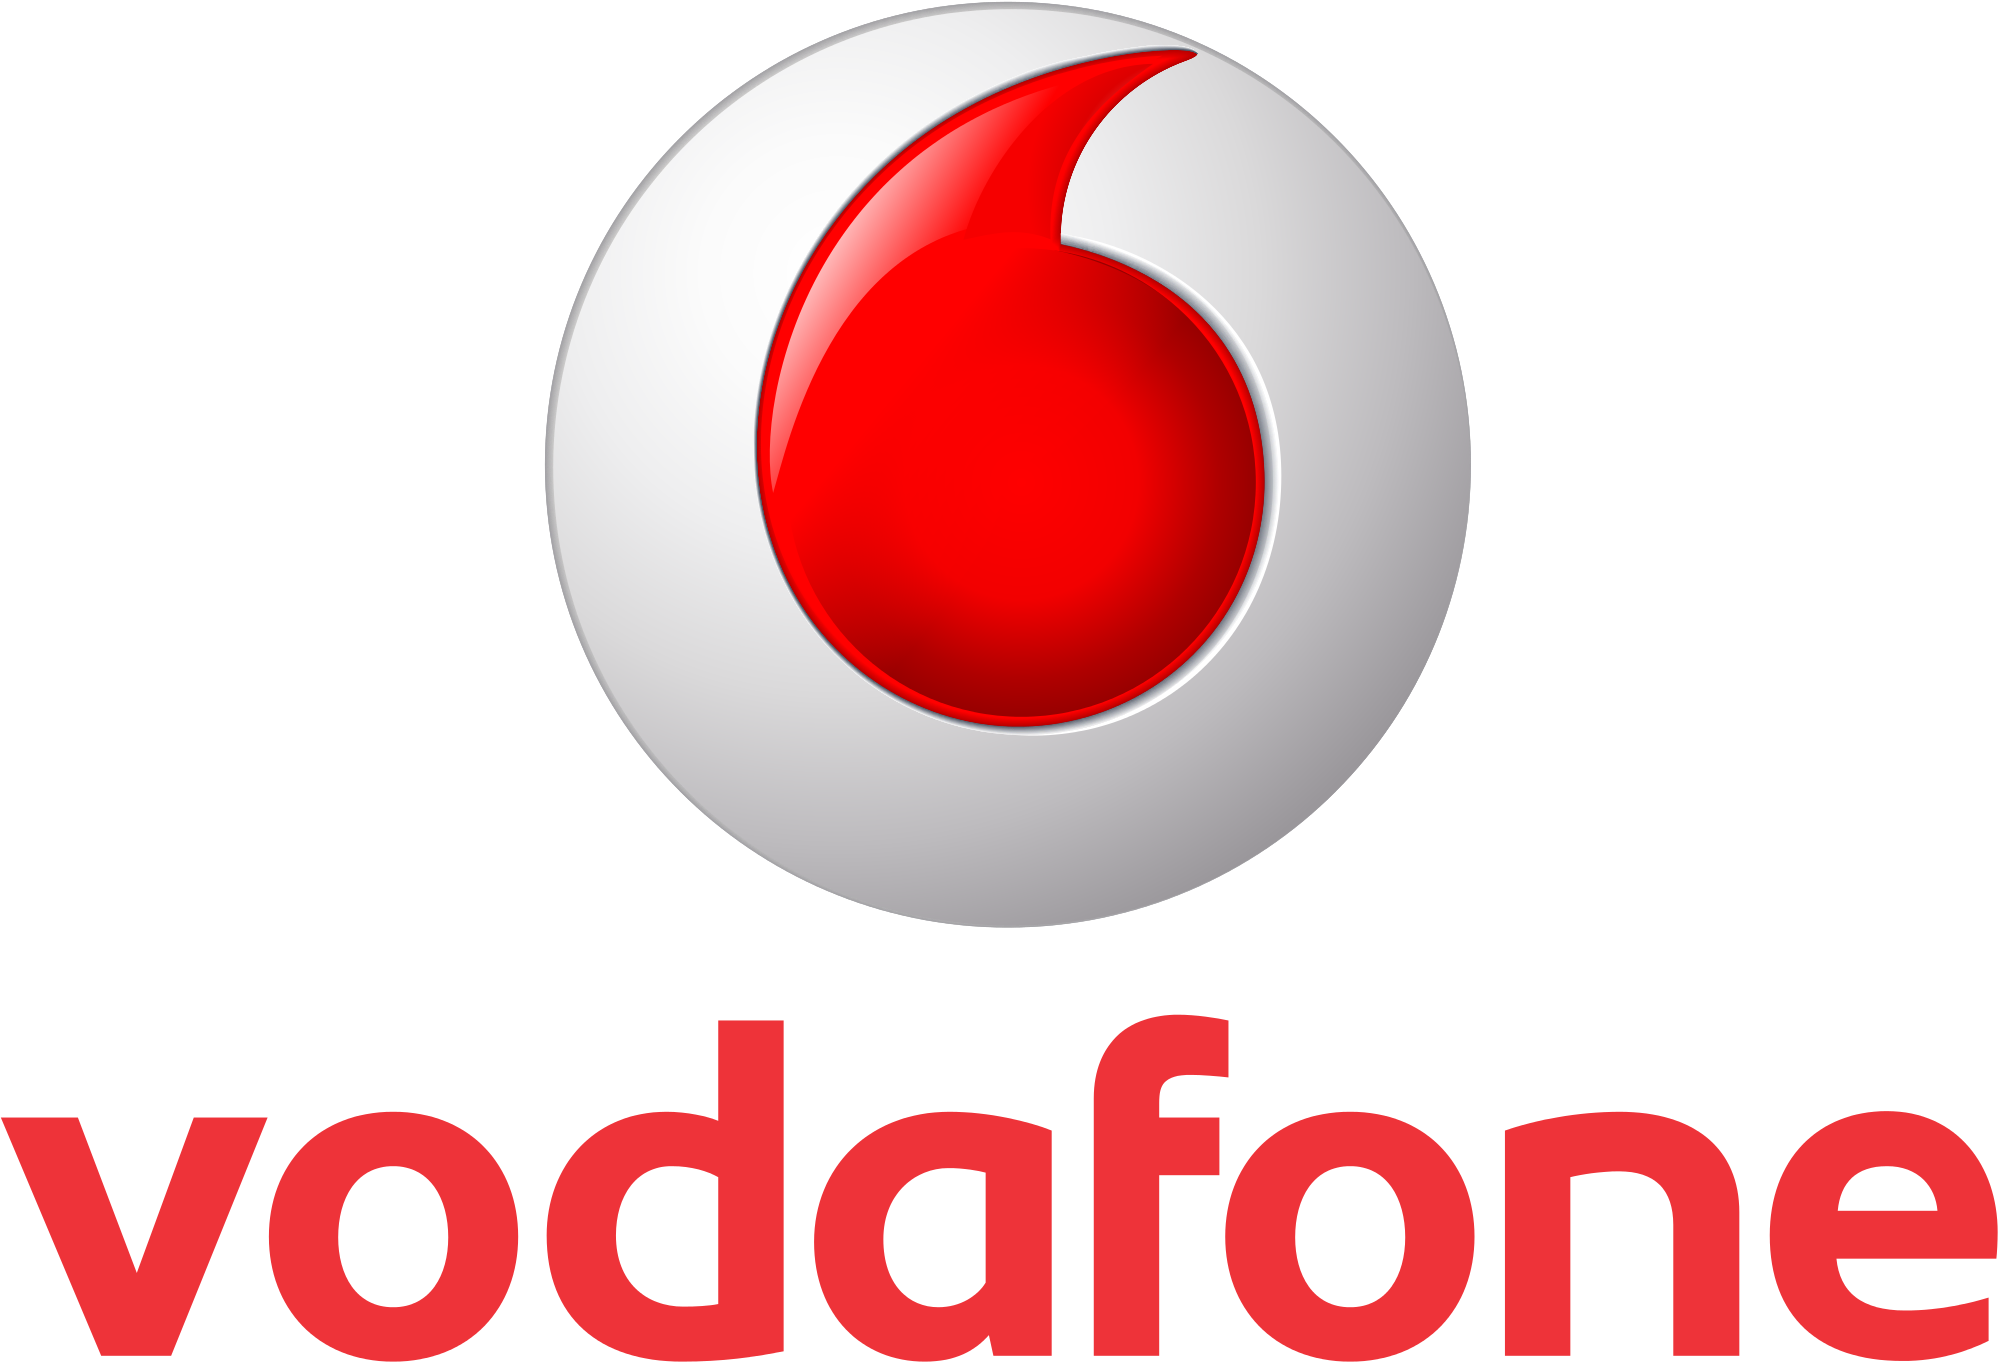 Vodafone Png 2000 X 1363